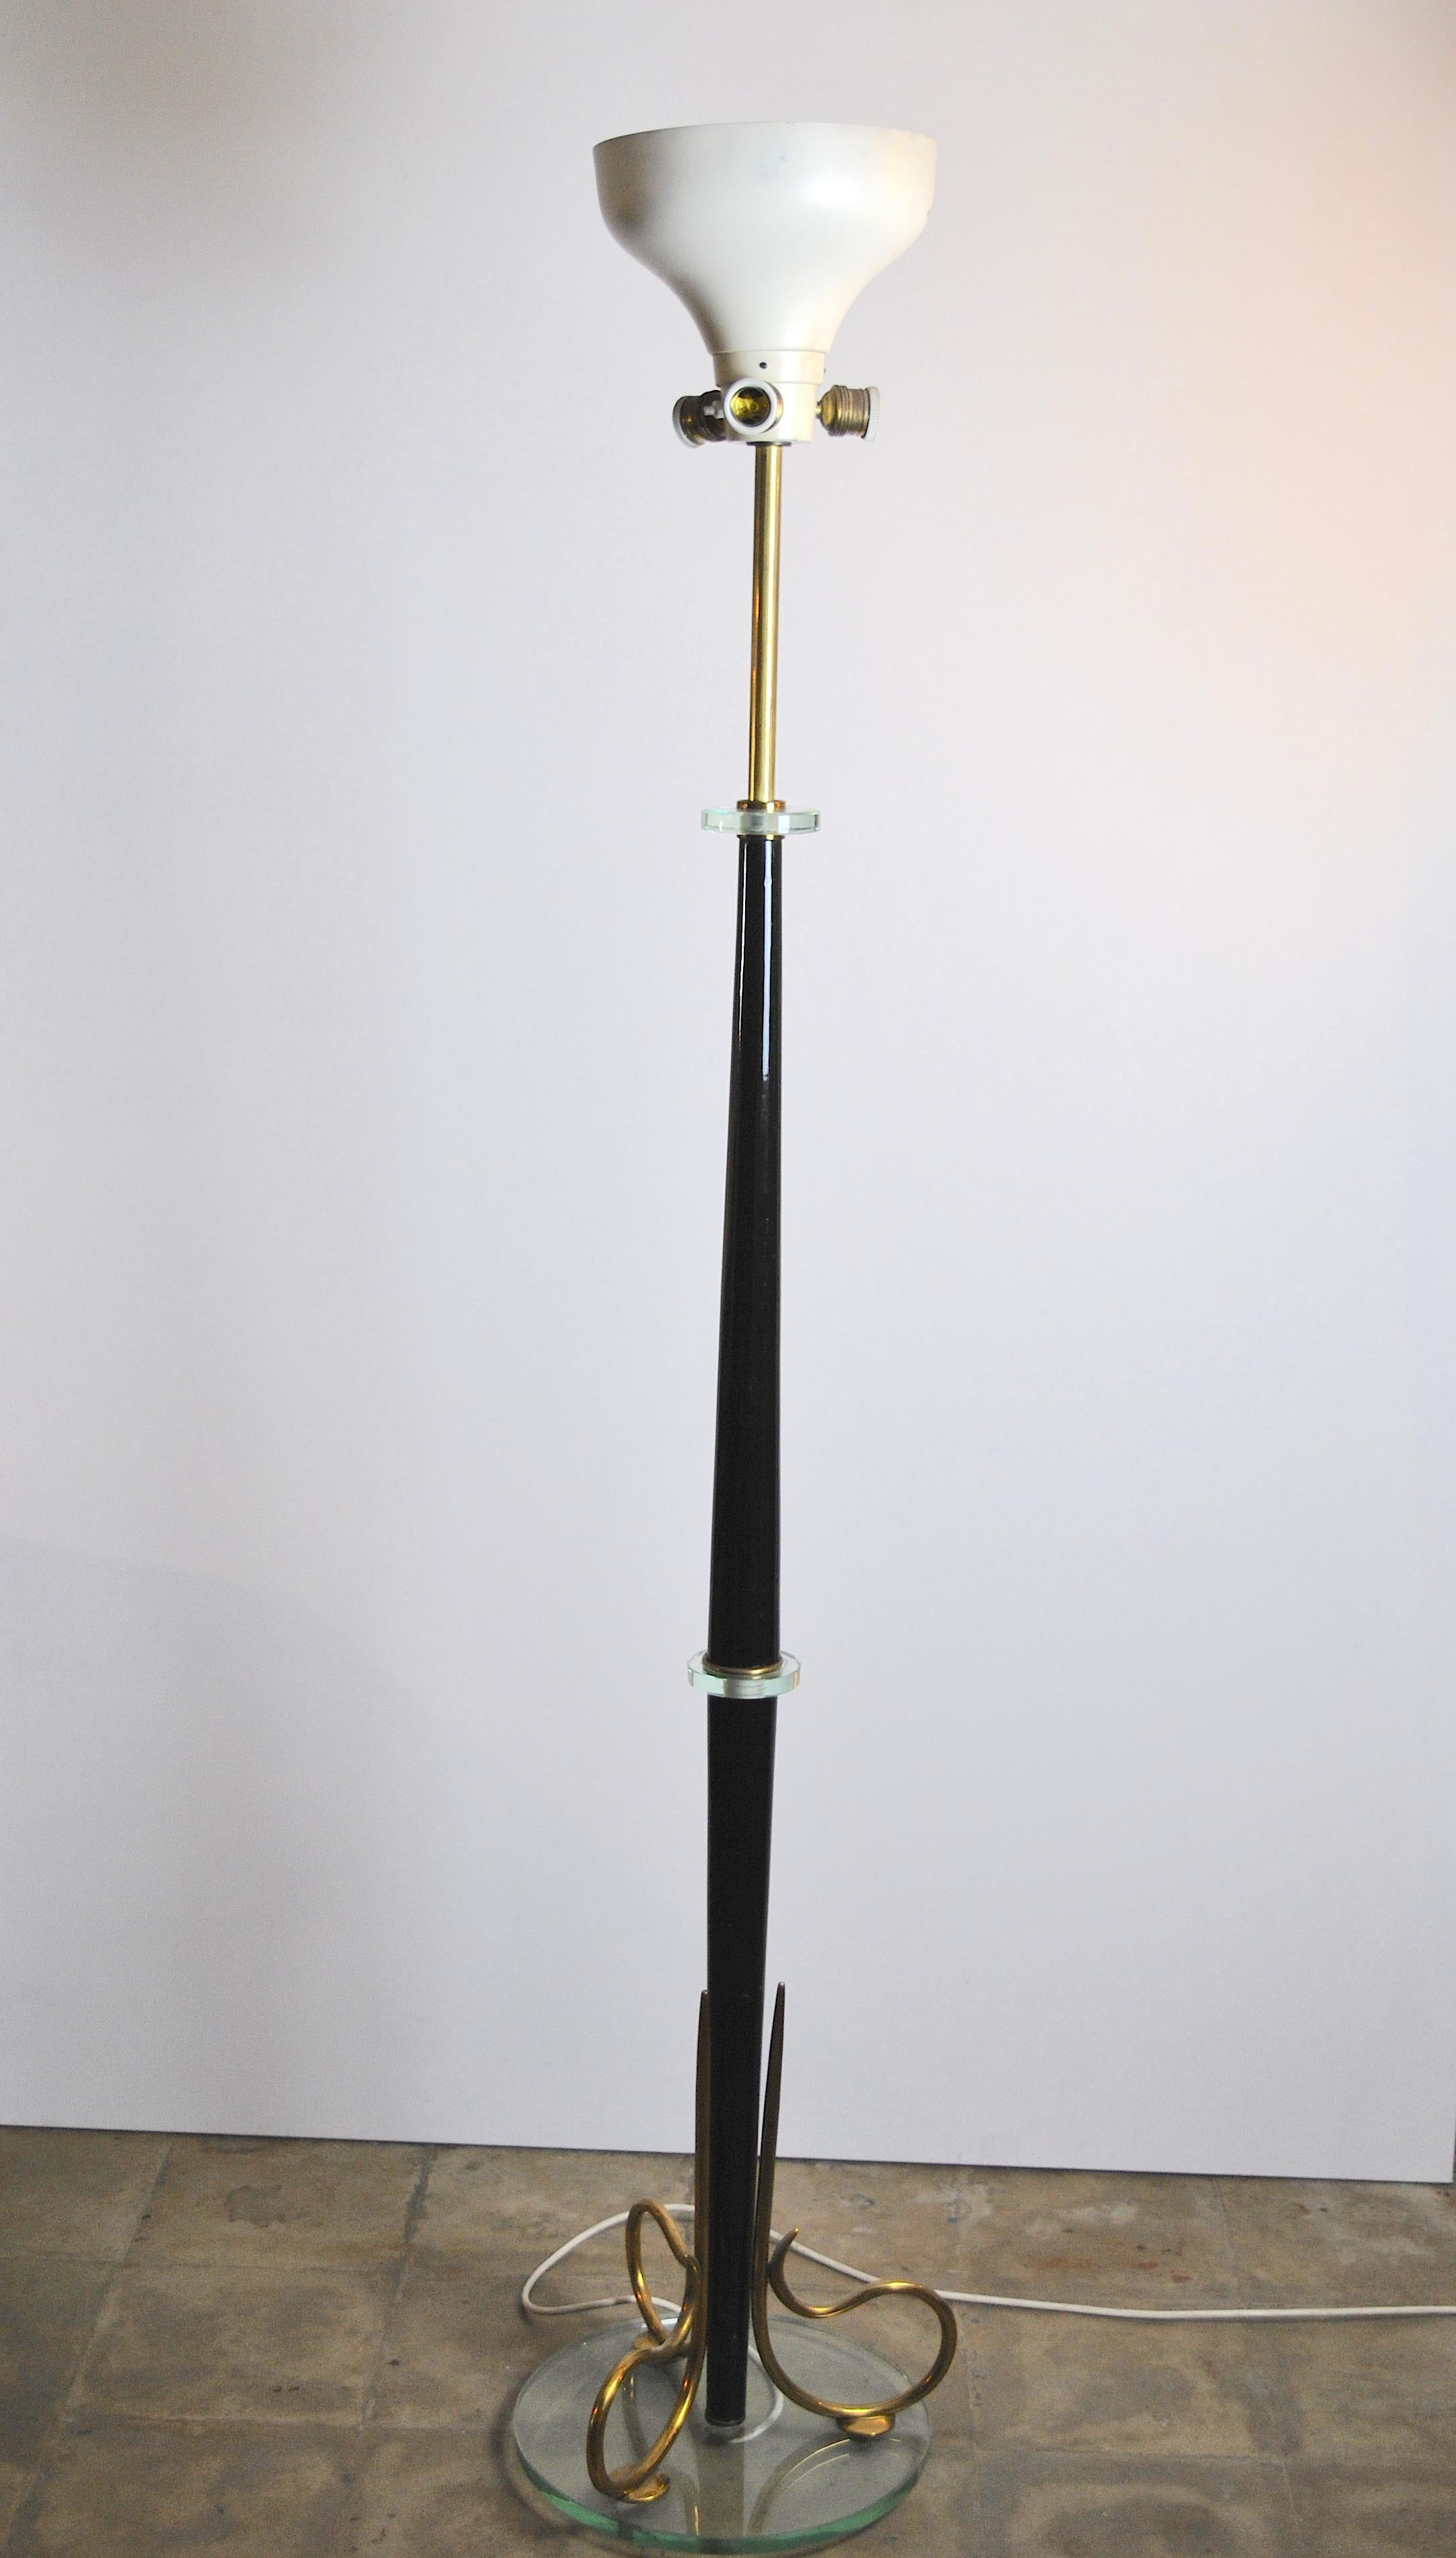 Mid-Century Modern Midcentury Italian Floor Lamp in Fontana Arte Style with Brass Finishes, 1950s For Sale